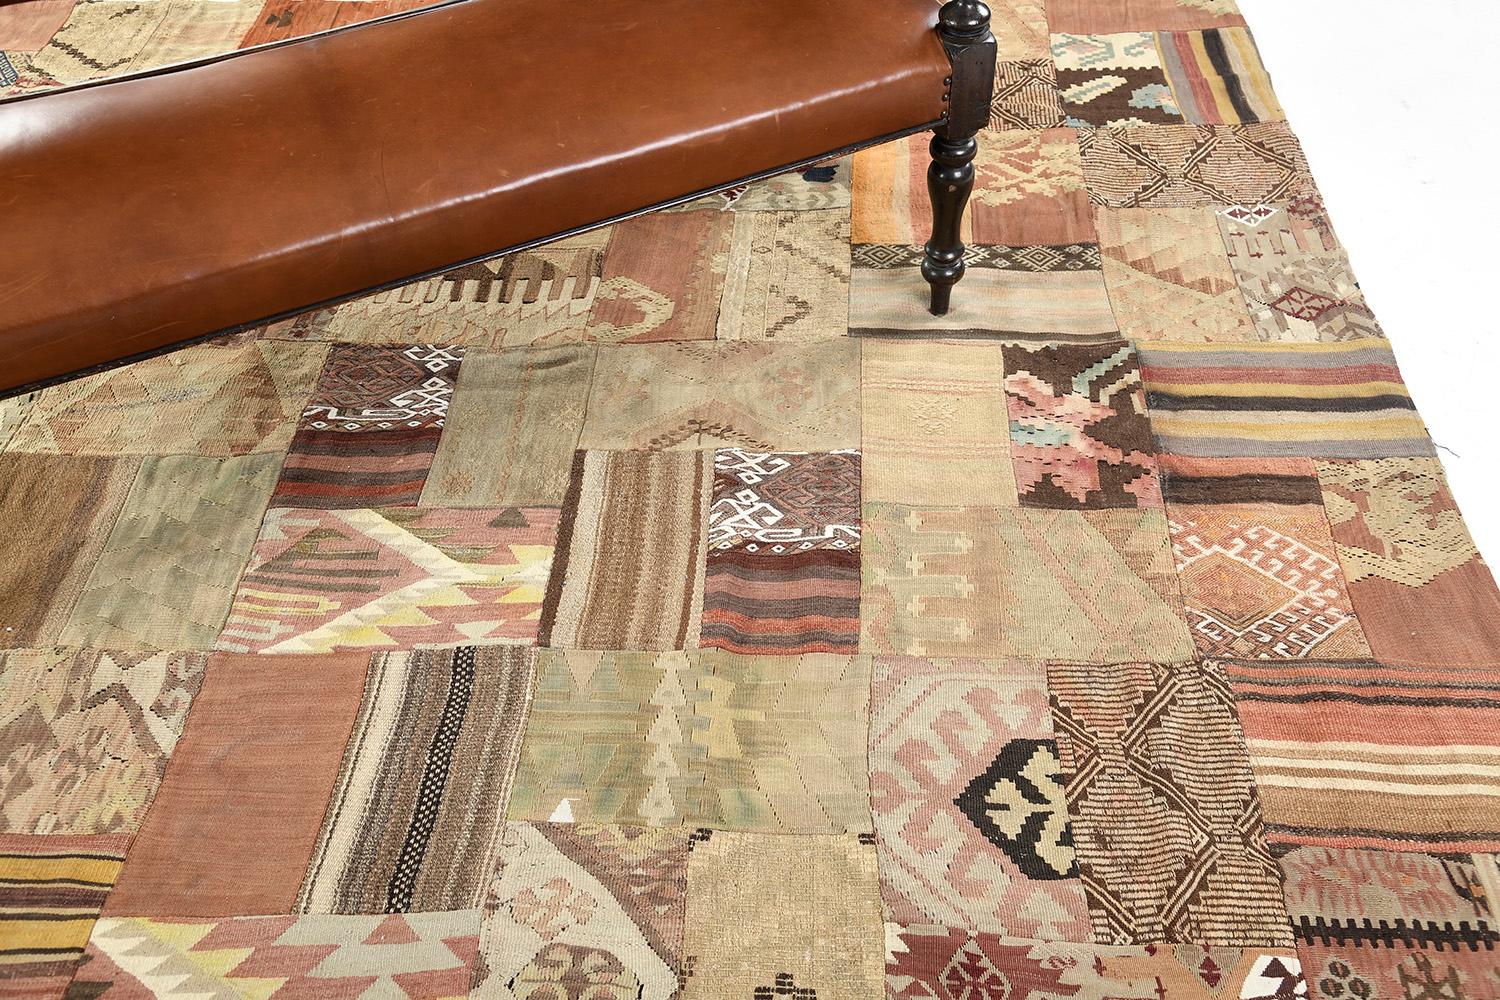 Displaying a charming and captivating impression, this Vintage Turkish Patchwork Kilim is an embodiment of modern rustic preppy style. The patchwork pattern is composed of intricately designed variegated irregular motifs, squares, and rectangles.